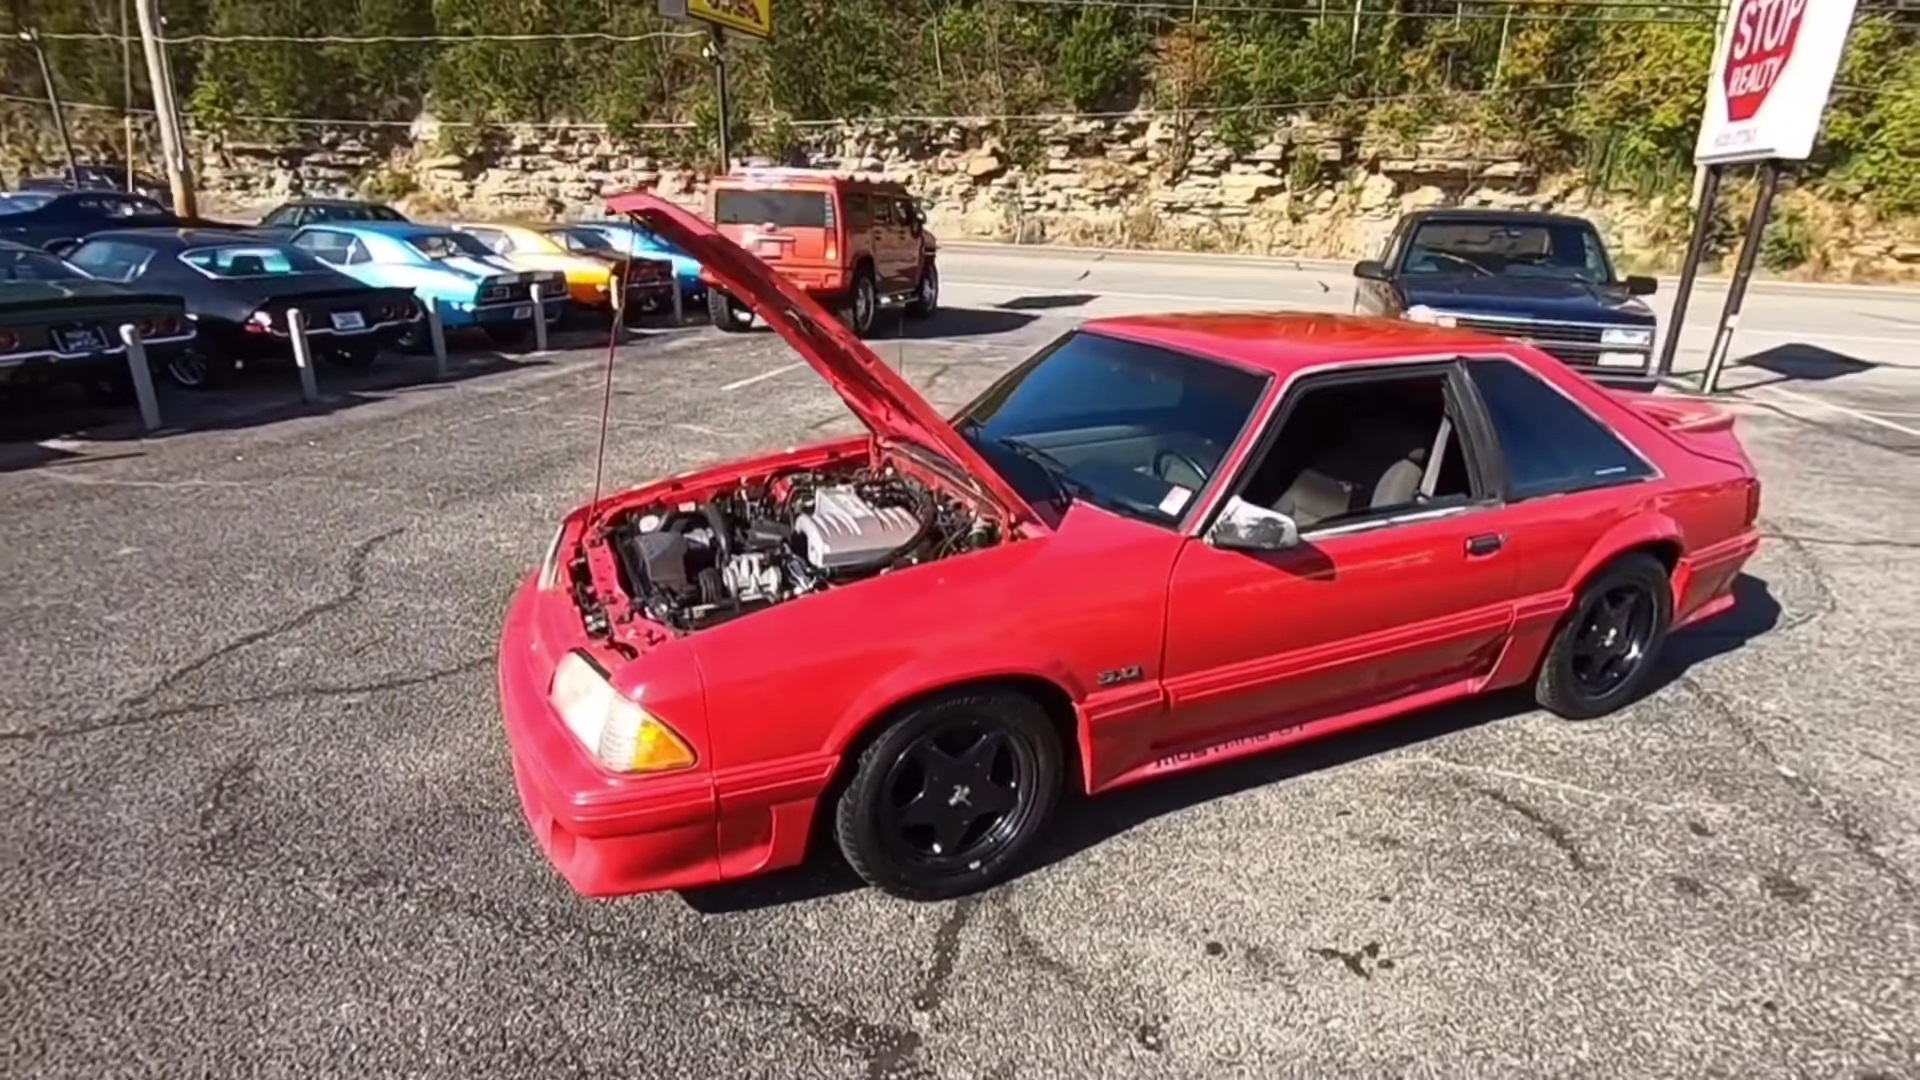 Video: 1992 Ford Mustang GT Full Test Drive